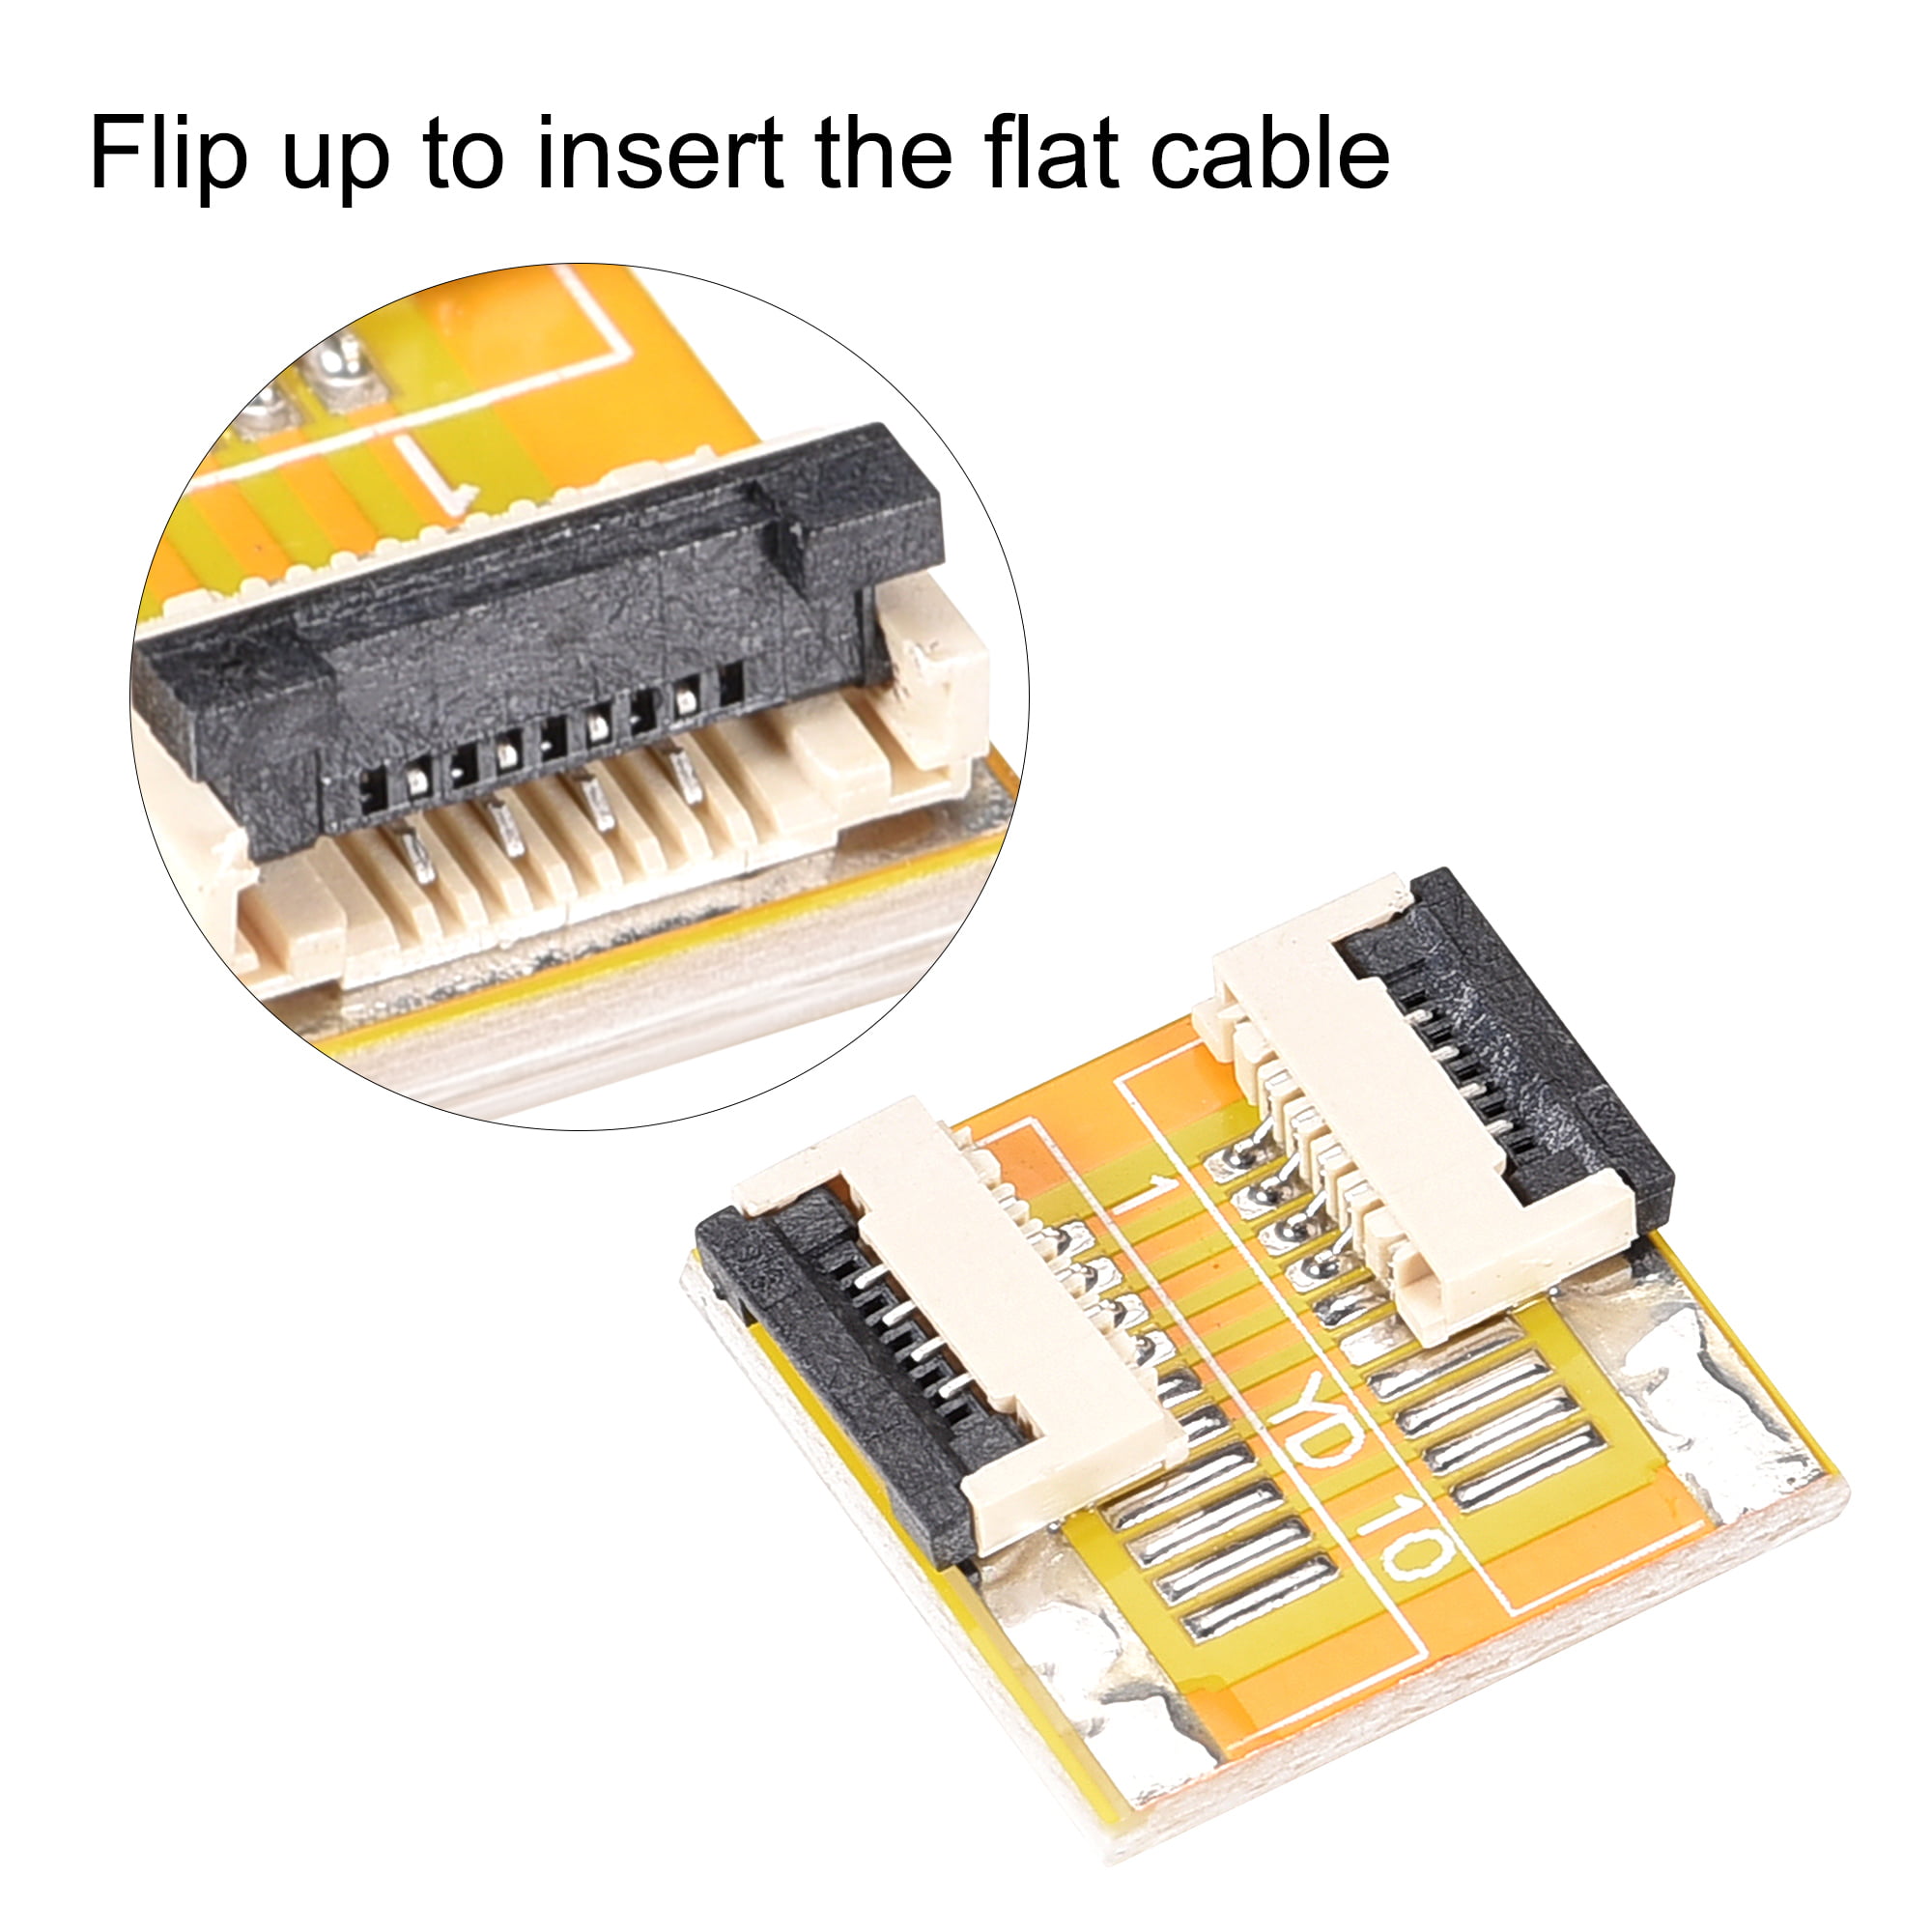 A Type Flexible Flat Cable and Flip Up to Mount Extend Adapter Kit